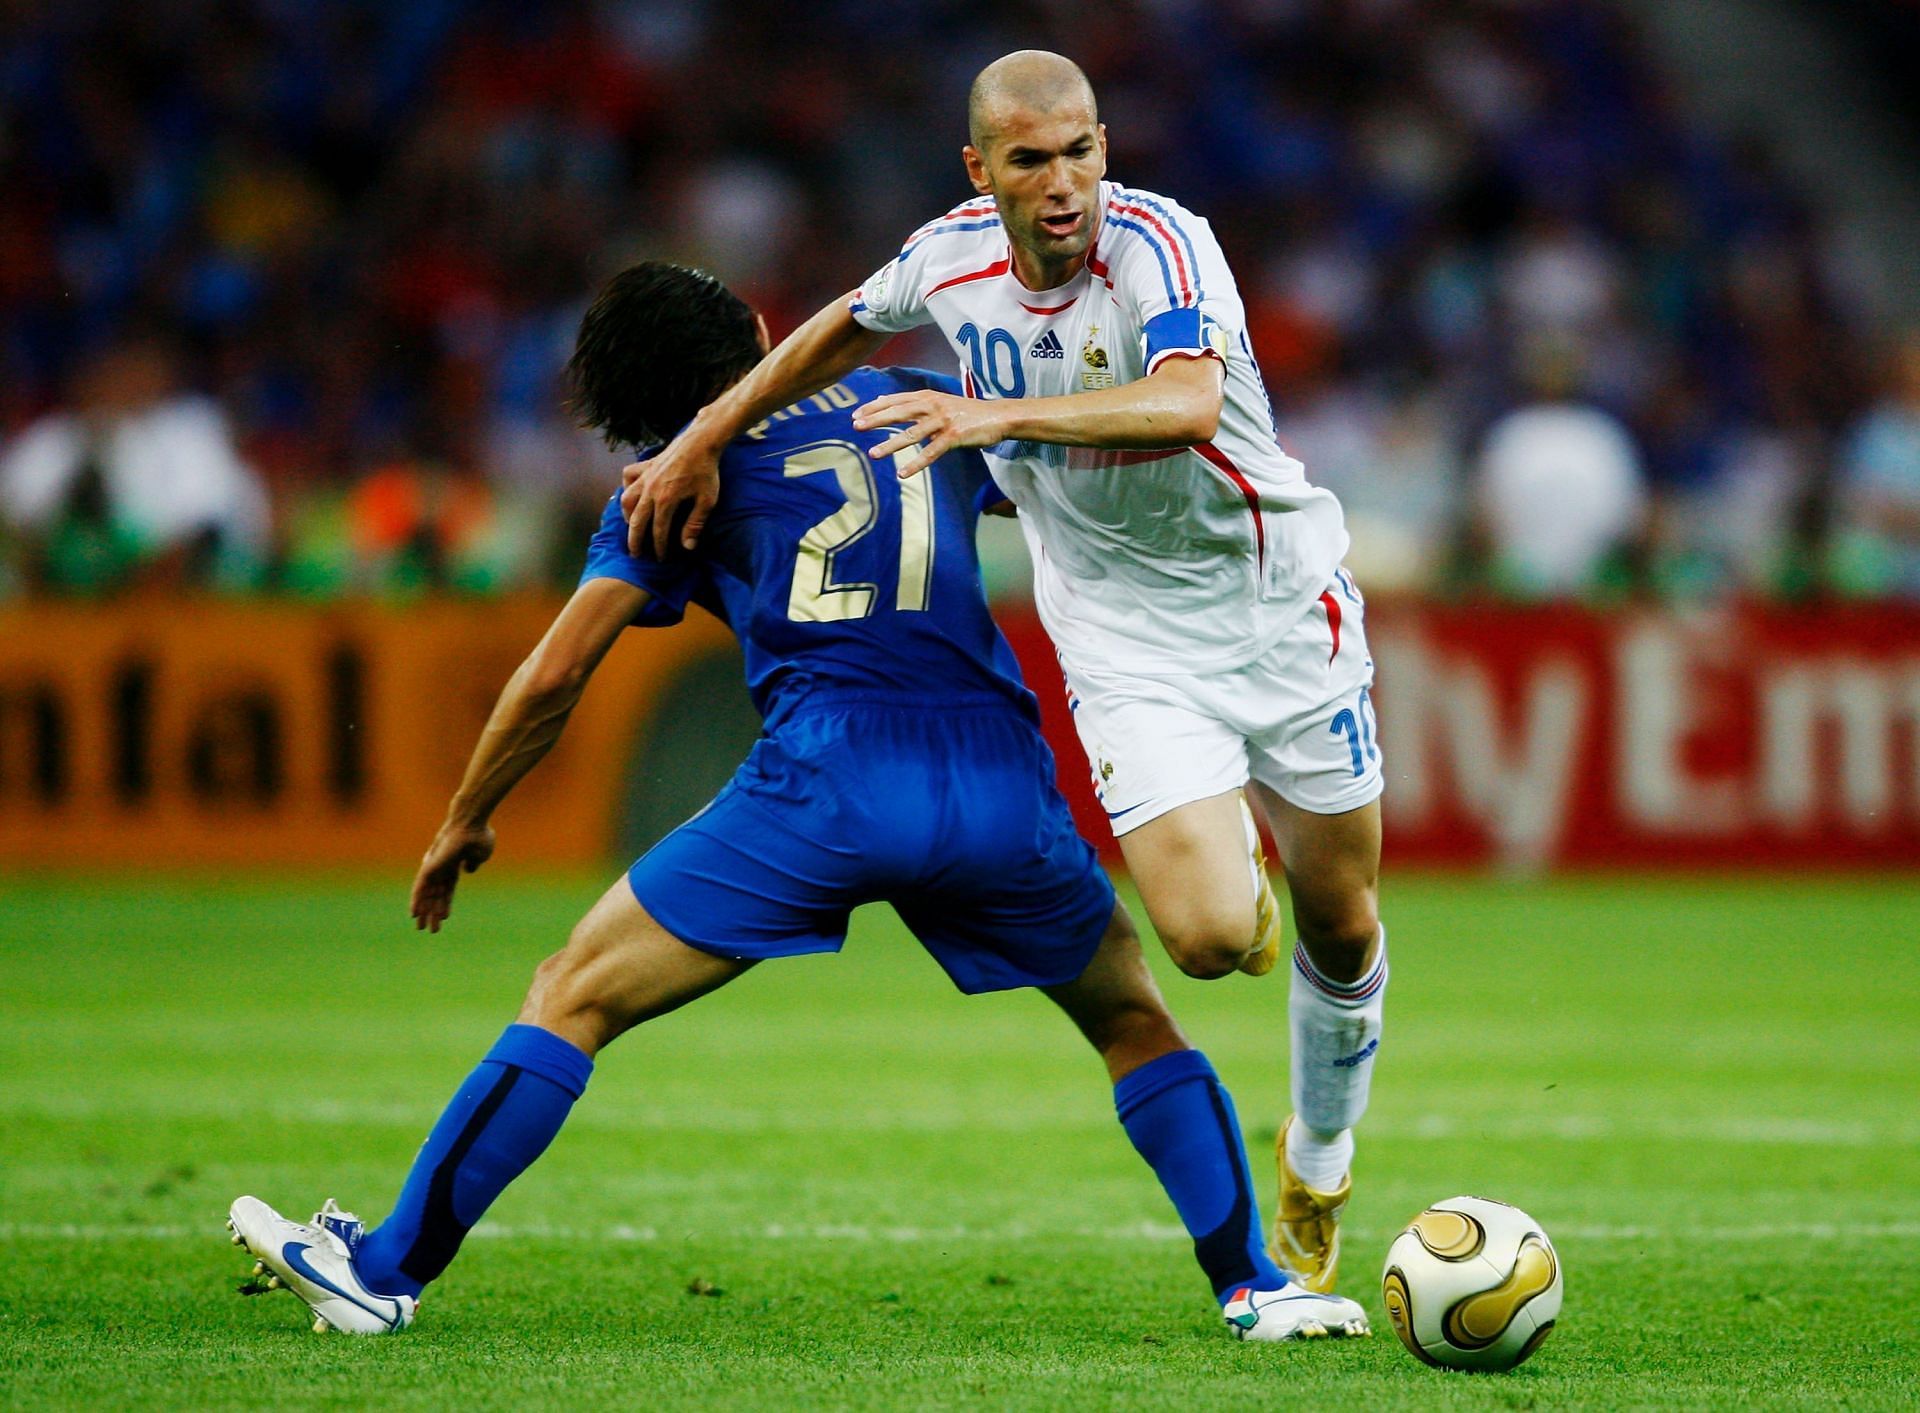 Zidane is widely rgarded as one of the best ever players